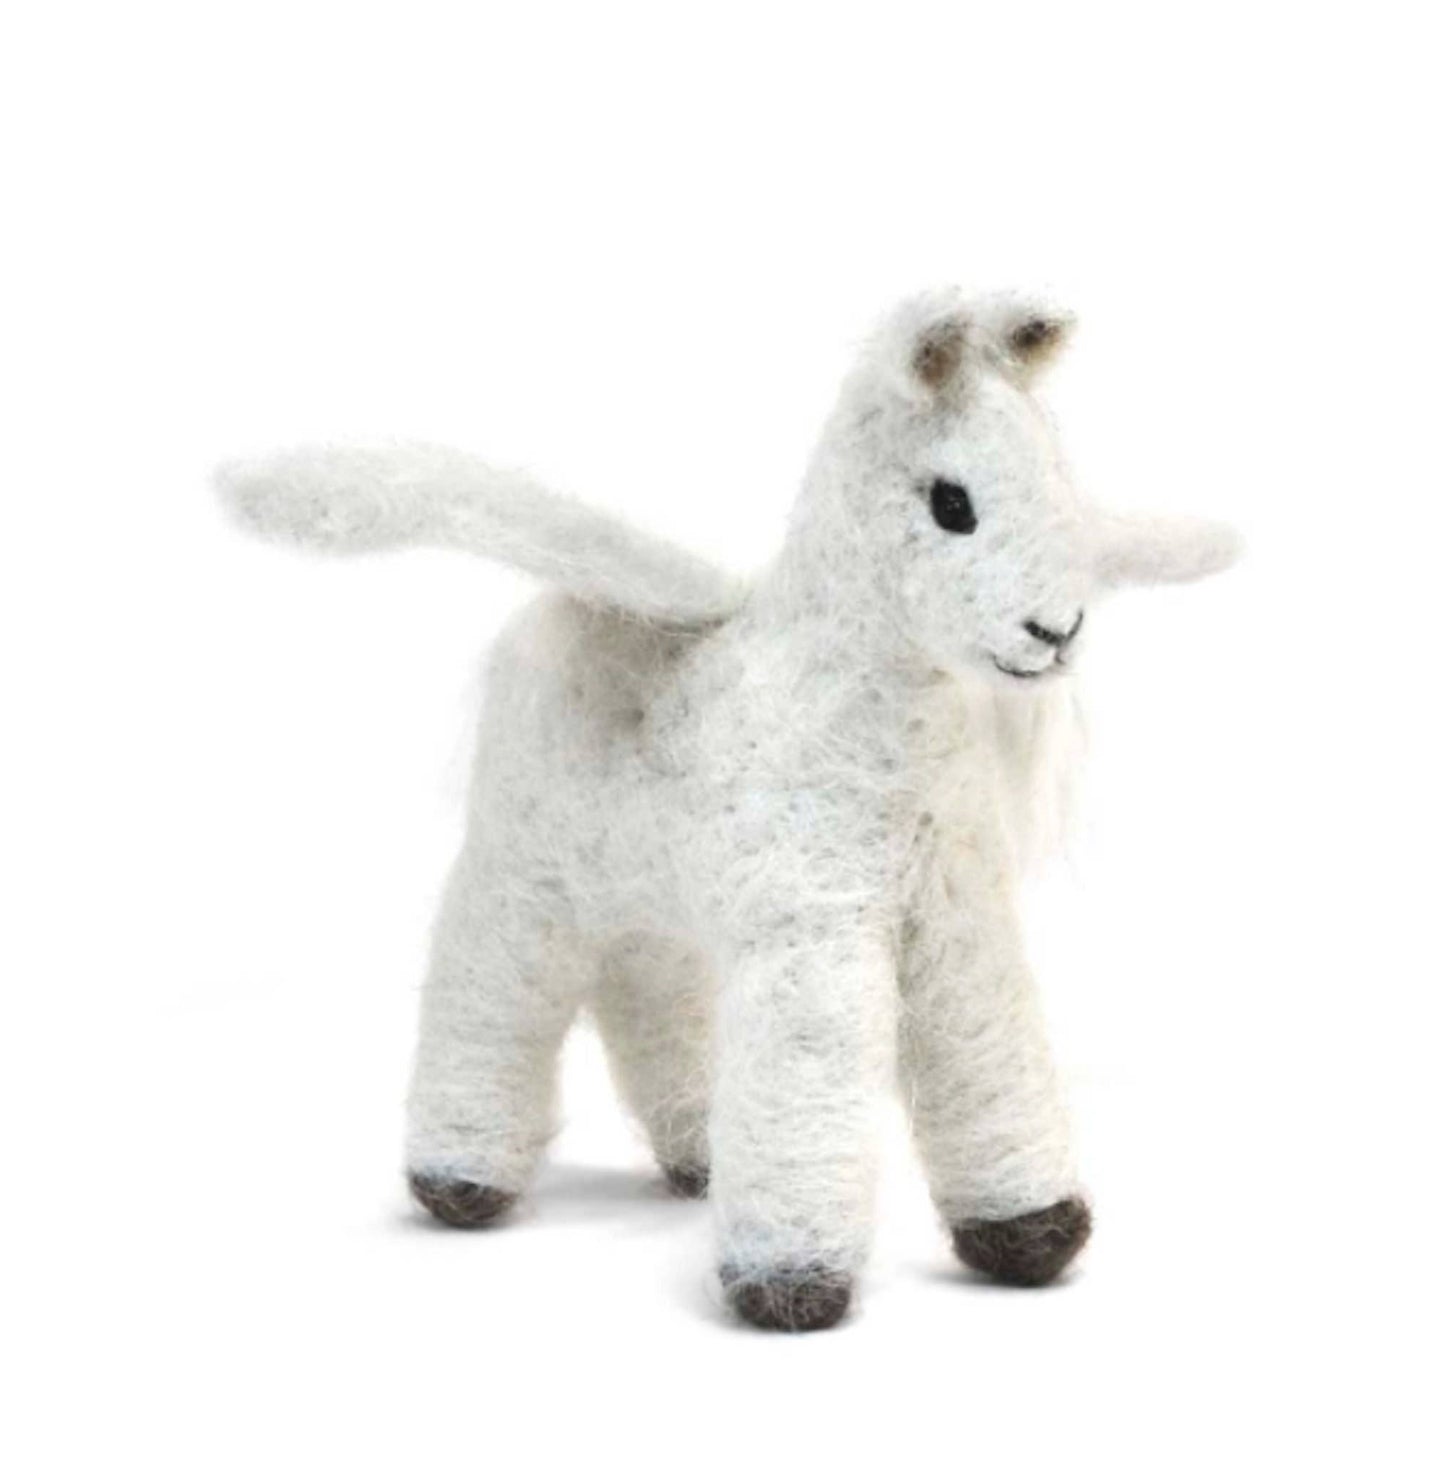 white pegasus ornament sculpture needle felted from alpaca wool